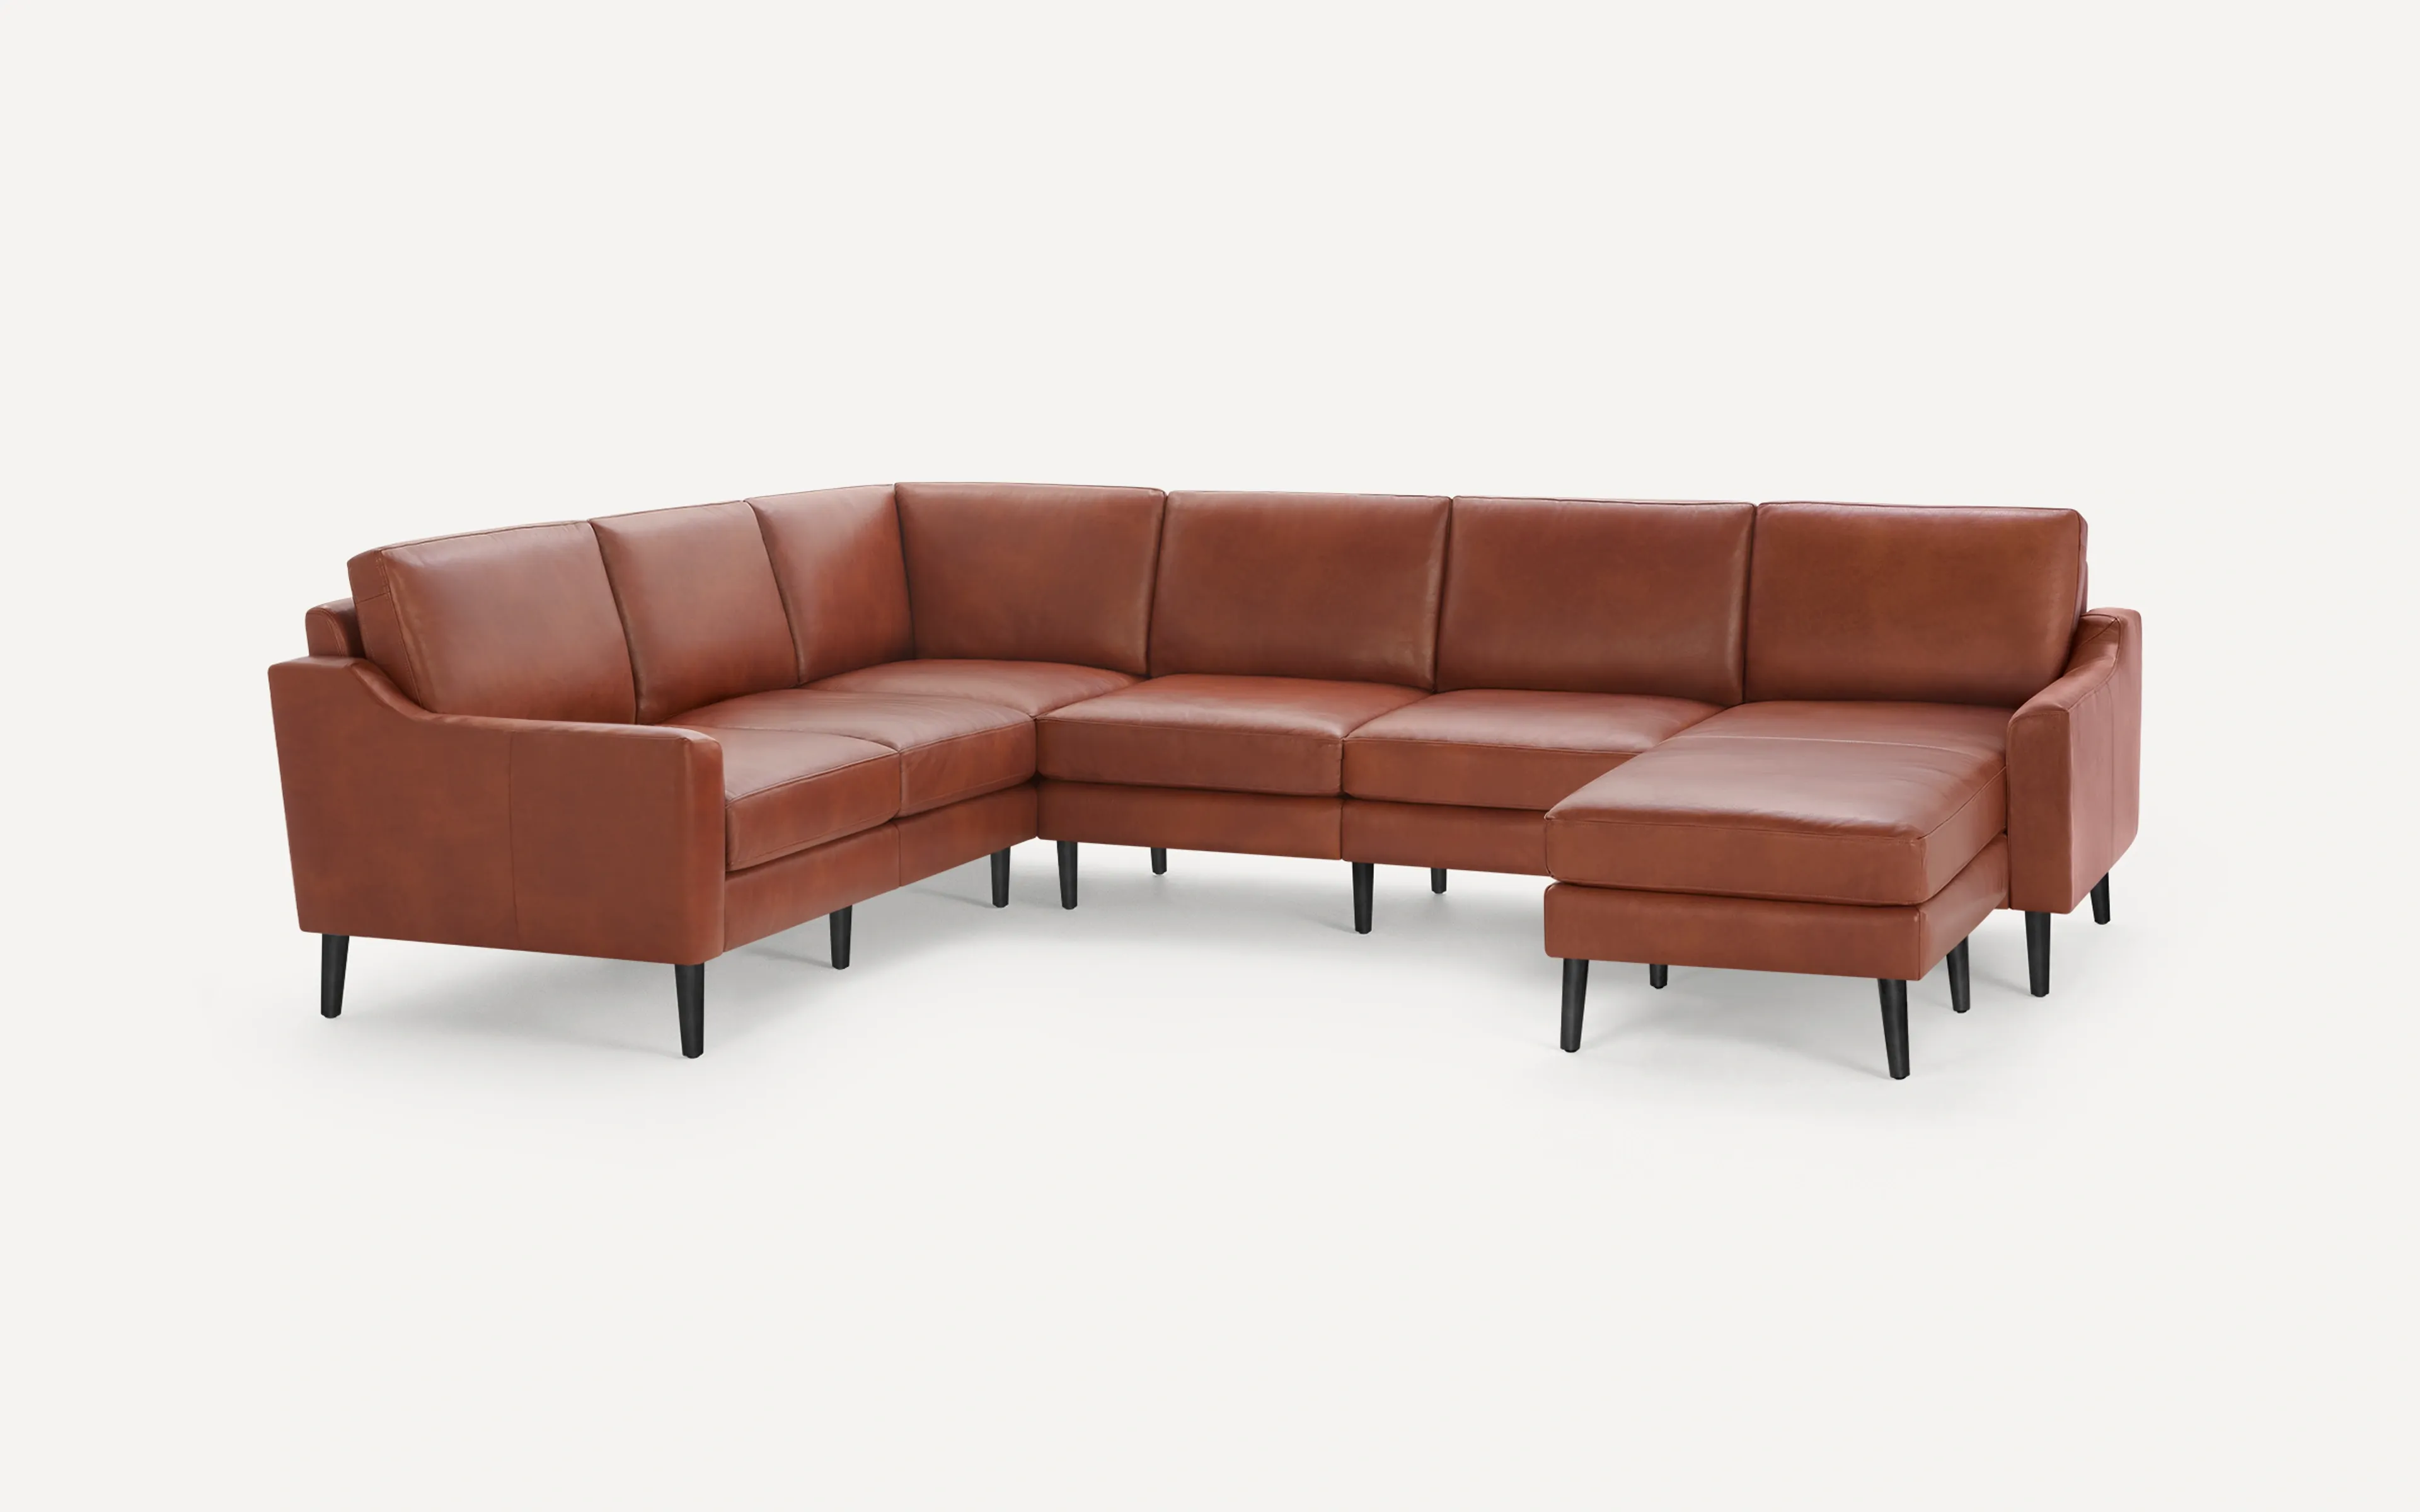 Slope Nomad Leather 6-Seat Corner Sectional with Chaise